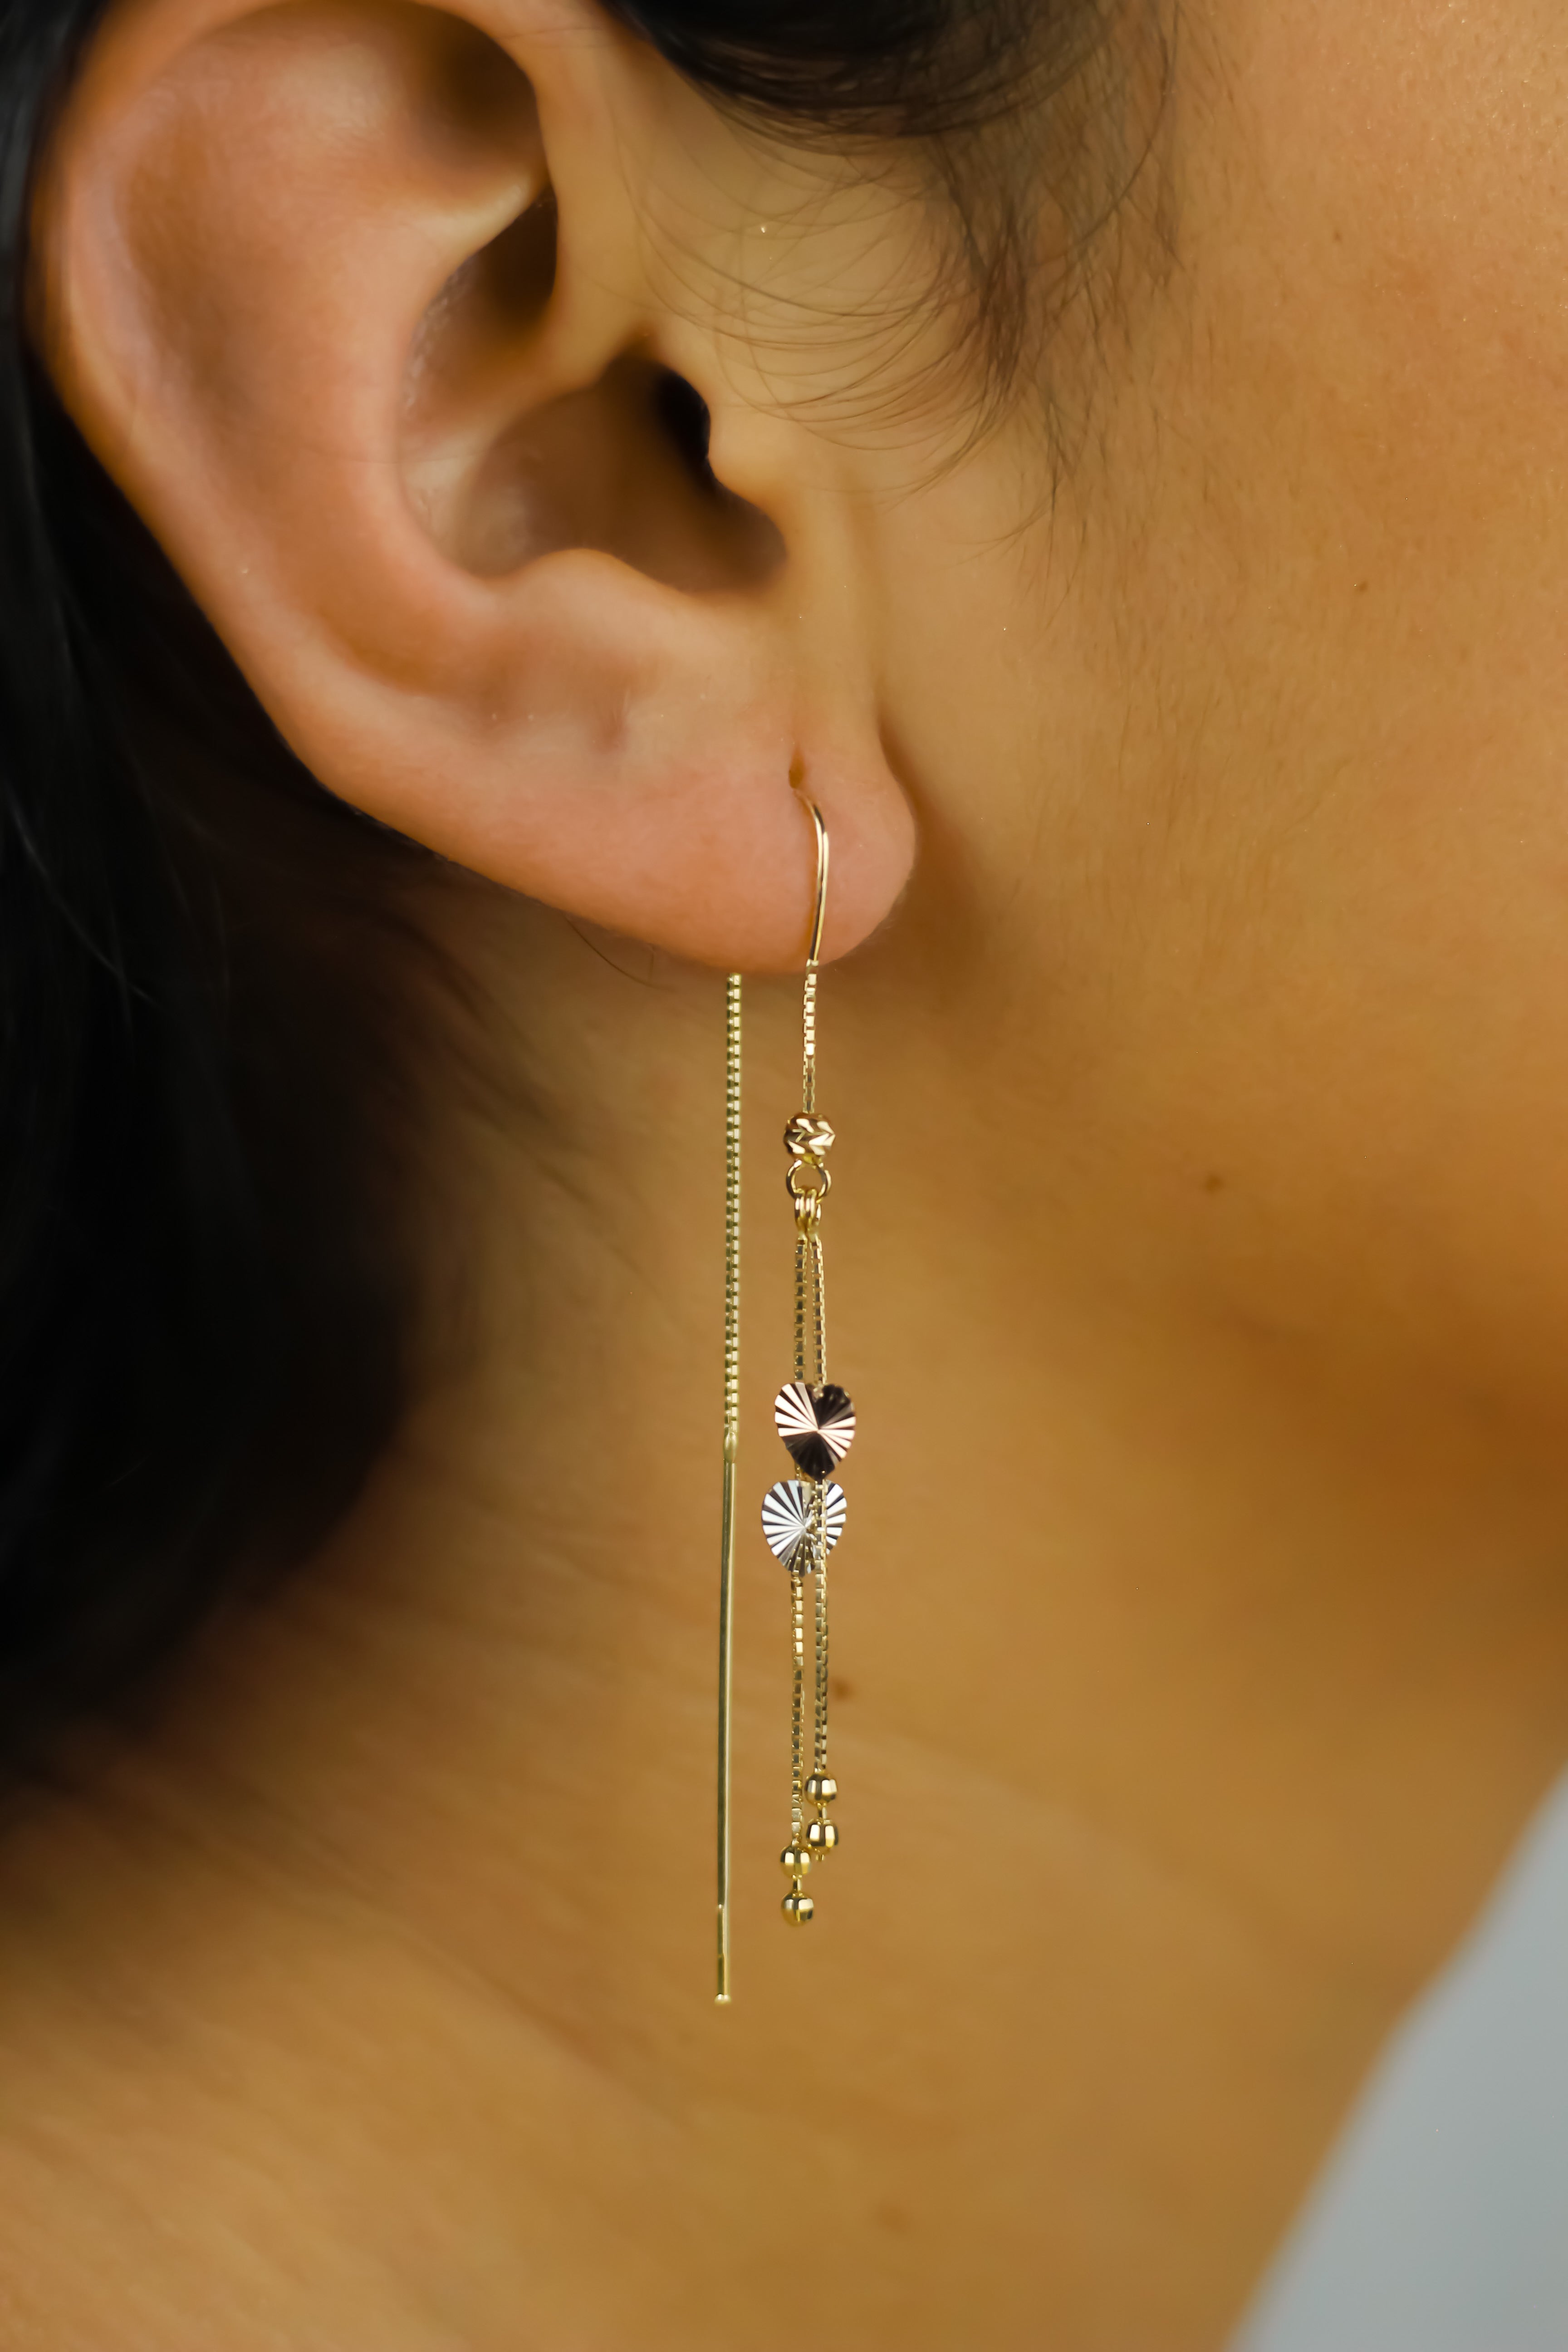 14K YELLOW GOLD LOVEJOY THREADER EARRINGS -TRI COLOR